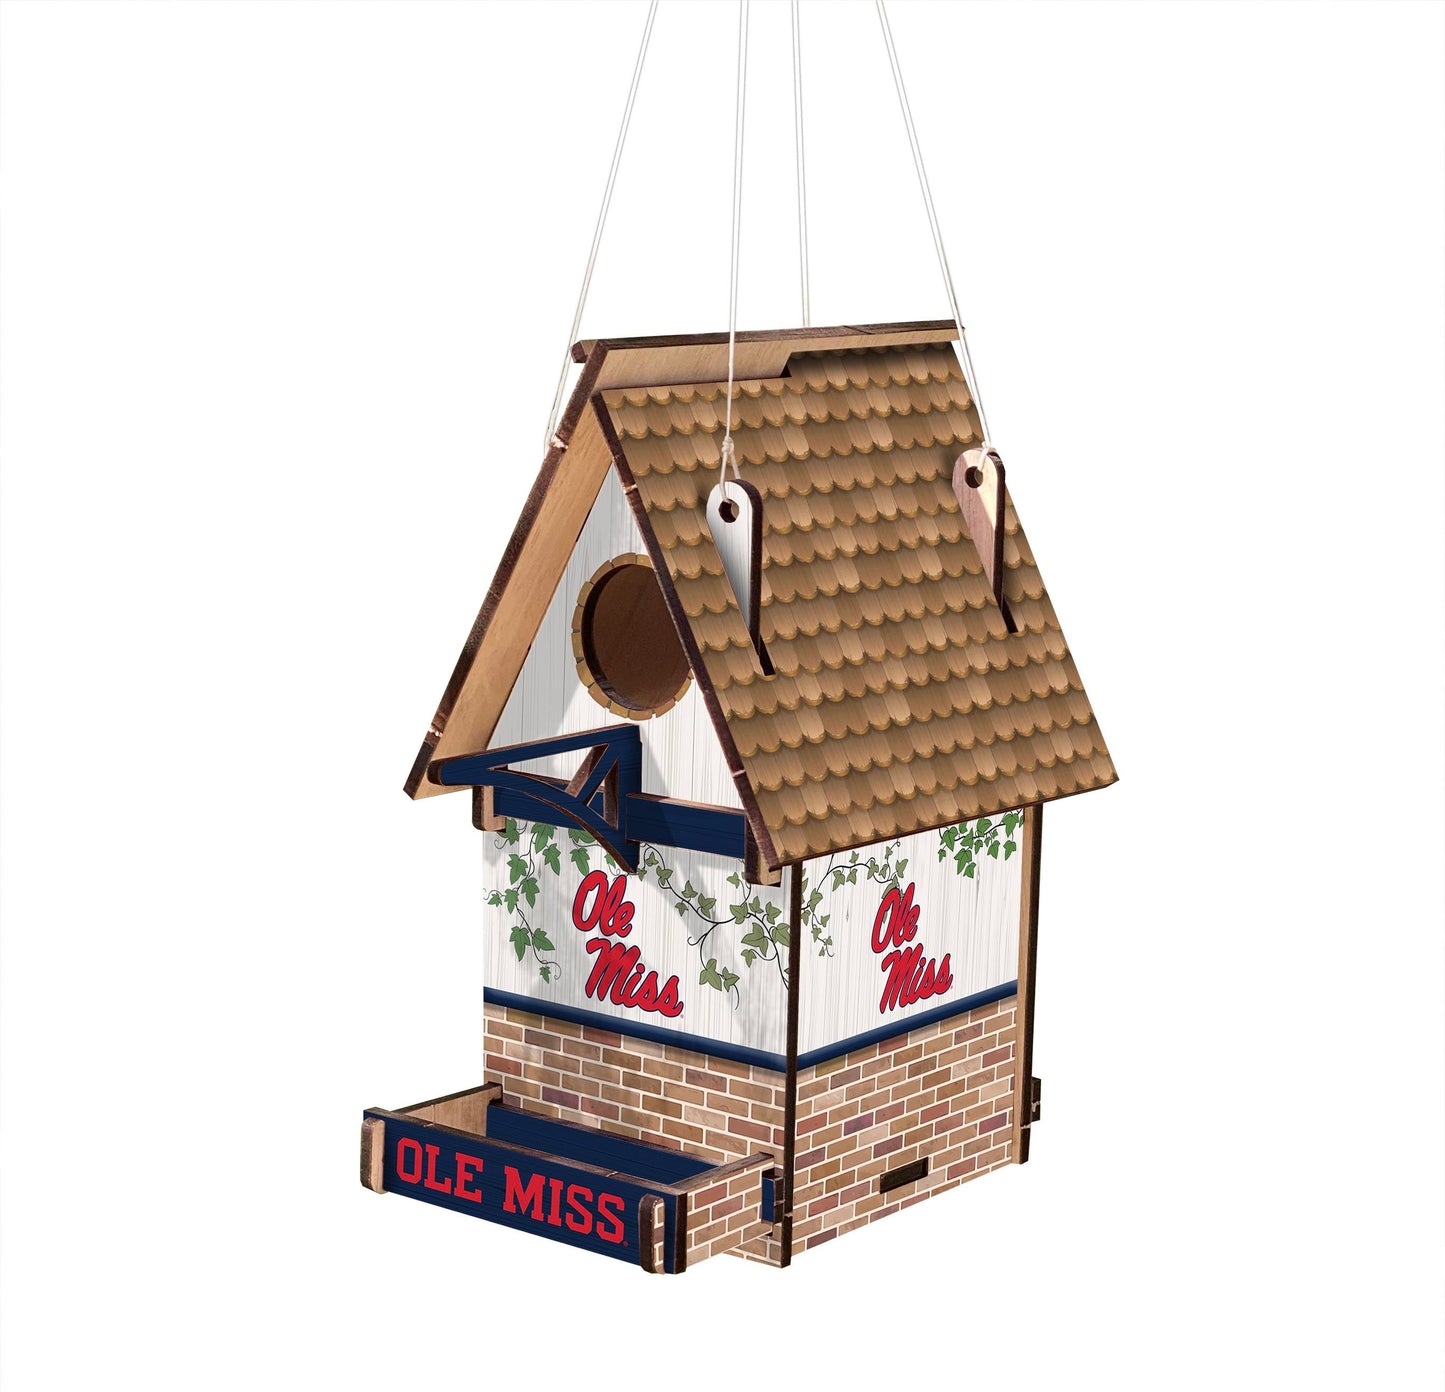 Show your pride for the Mississippi {Ole Miss} Rebels with this officially licensed wood birdhouse. Crafted in the USA, this birdhouse is designed with team graphics and colors to show your team spirit in style. Constructed with MDF and measuring 15" x 15"